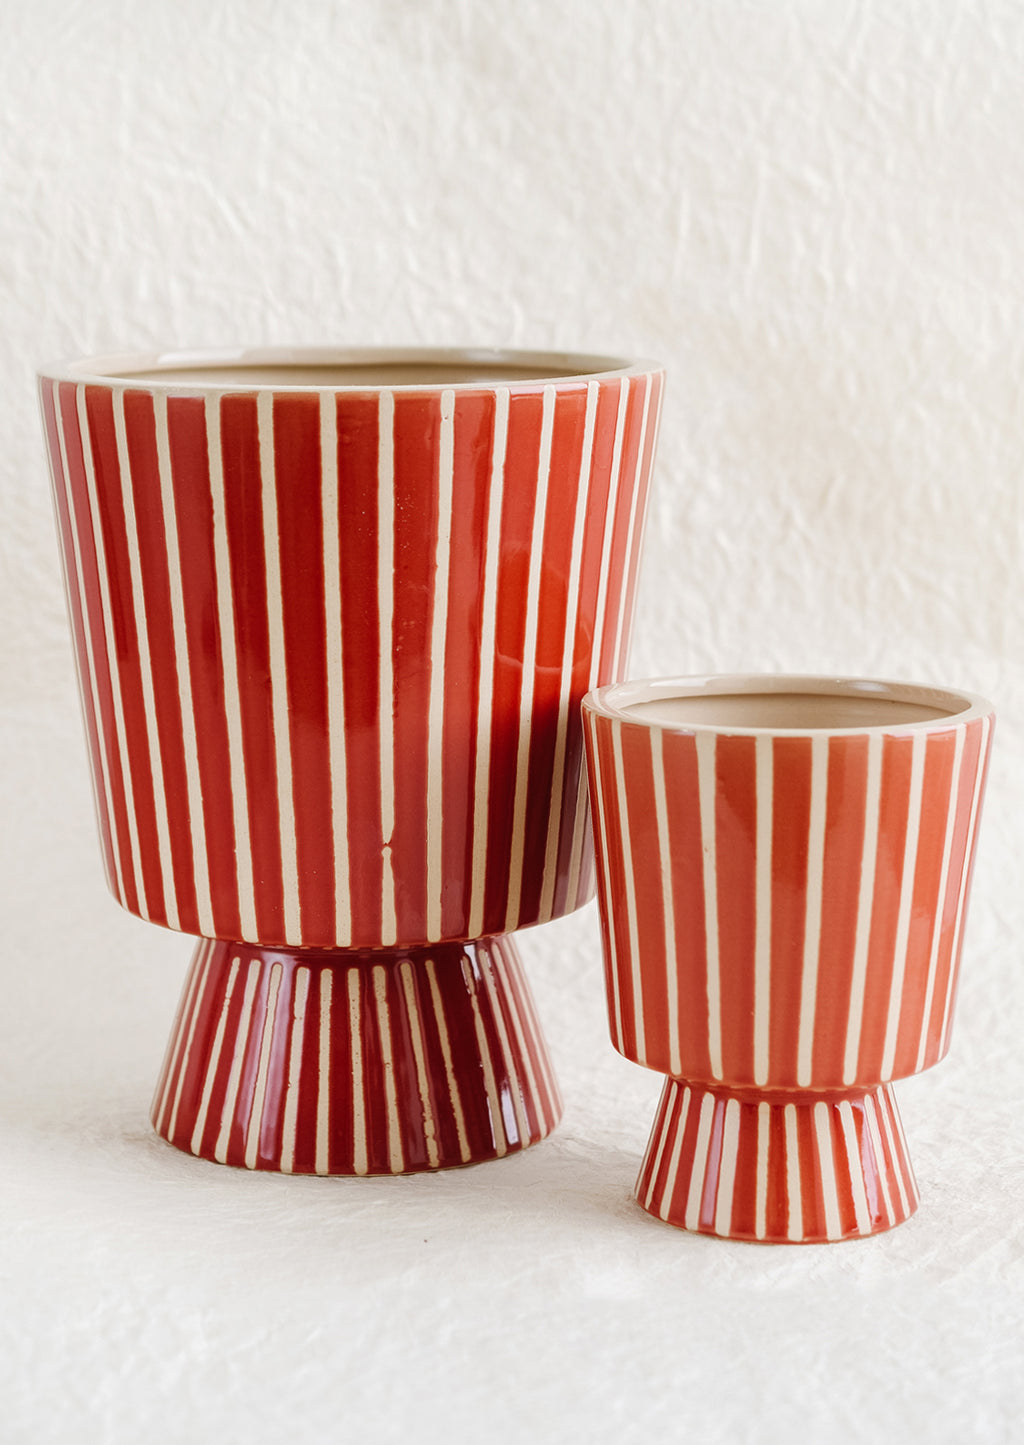 2: A footed planter with vertical white stripes on red ceramic, in small and large sizes.